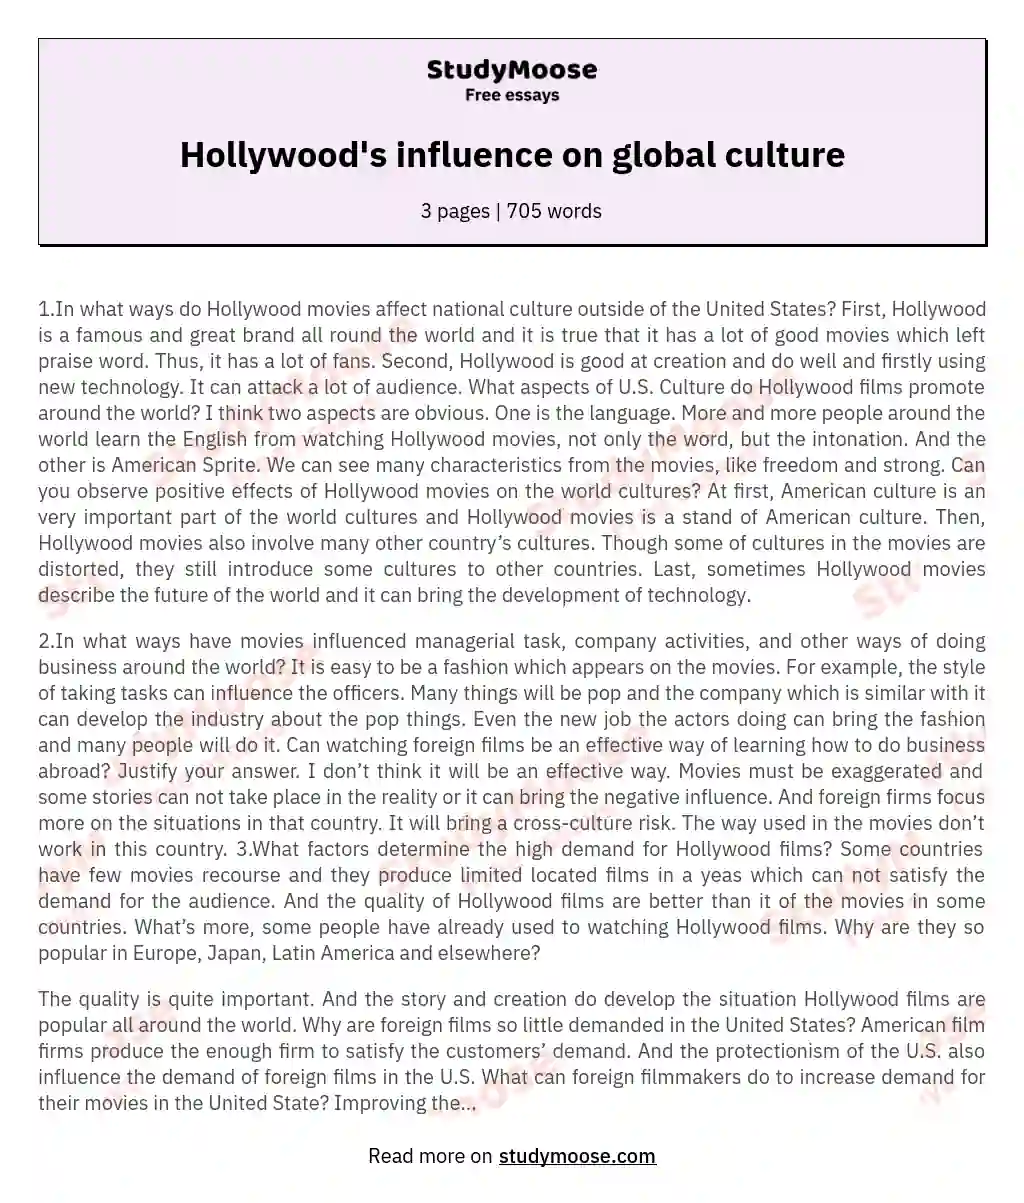 Hollywood's influence on global culture essay